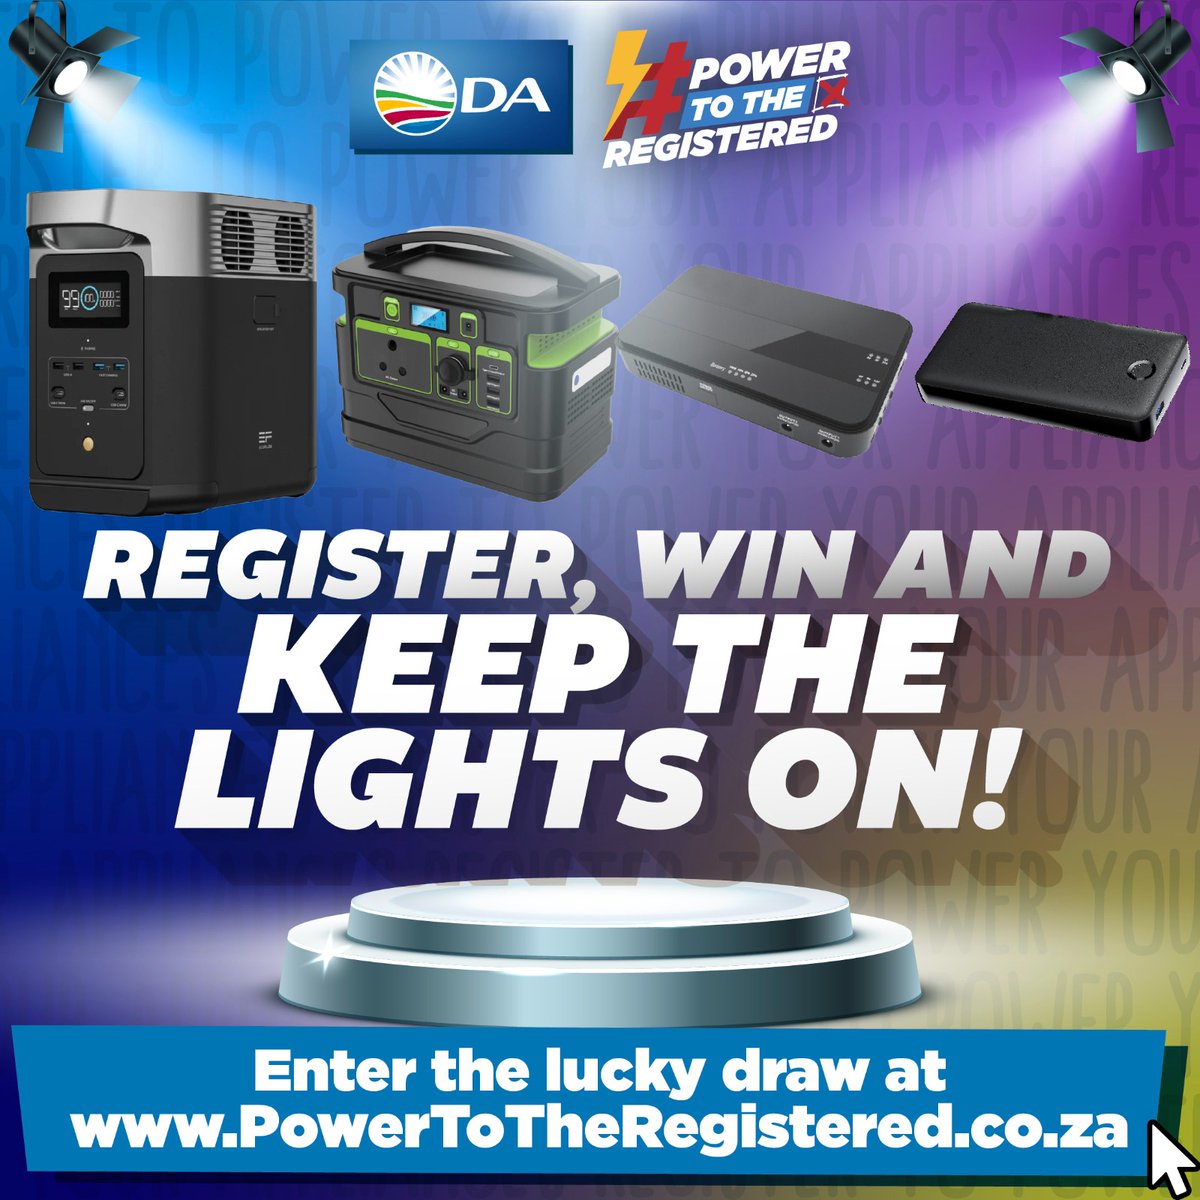 ⏰ Still not registered? Time's ticking!

Be the change and help #RescueSA. Register to vote now and enter our #PowerToTheRegistered competition for a chance to win fantastic prizes like inverters and power banks!

Visit PowerToTheRegistered.co.za to enter.

#RegisterToVoteDA